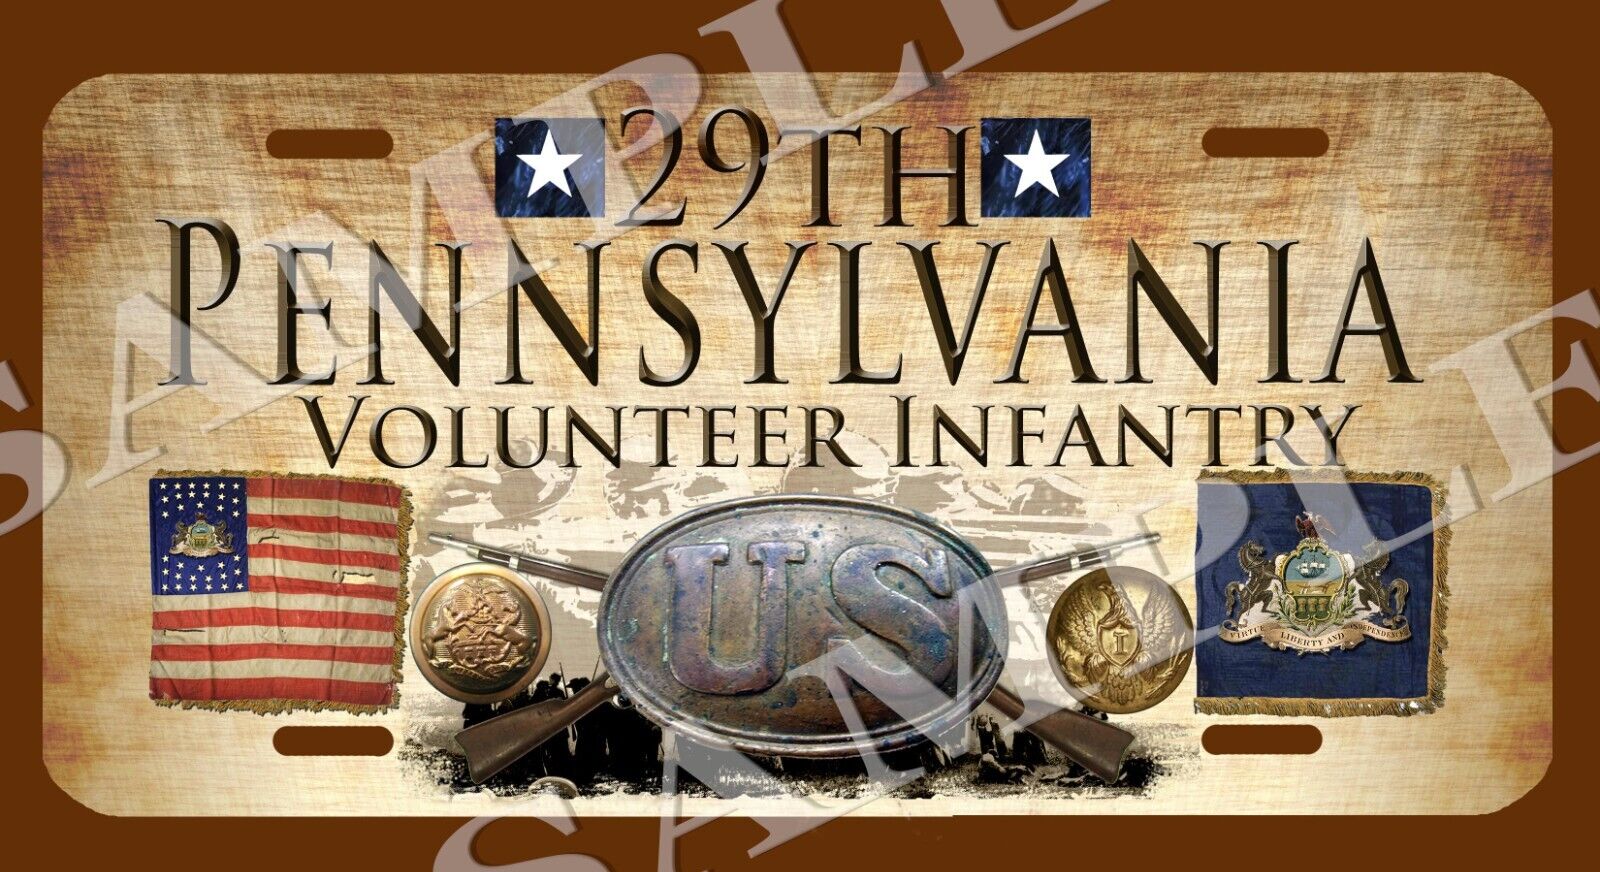 29th Pennsylvania Infantry American Civil War Themed vehicle license plate